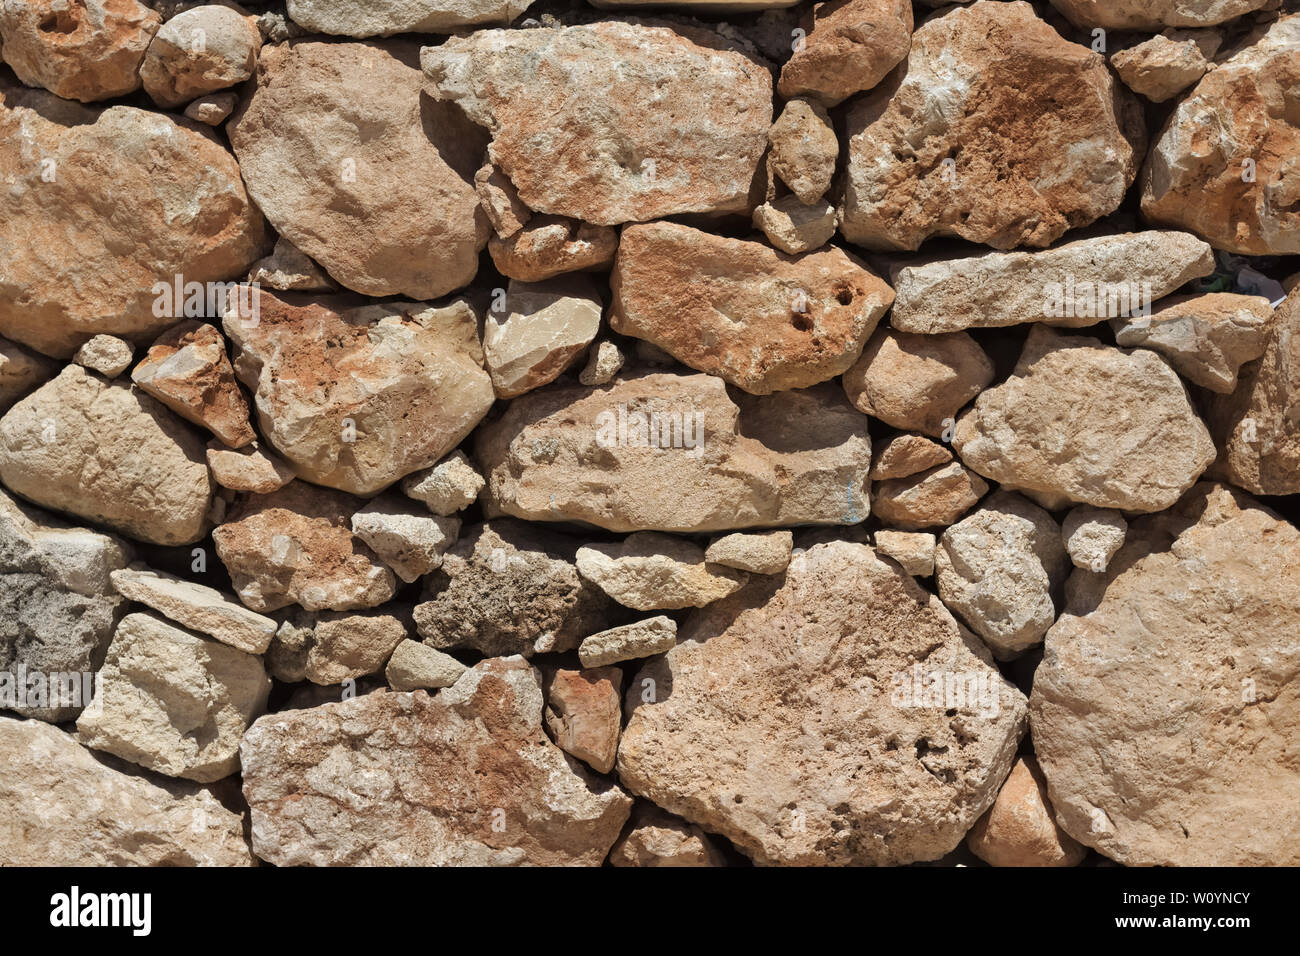 Natural beige stone wall (masonry) created by stacking stones on top of each other with varying stone sizes. Stock Photo